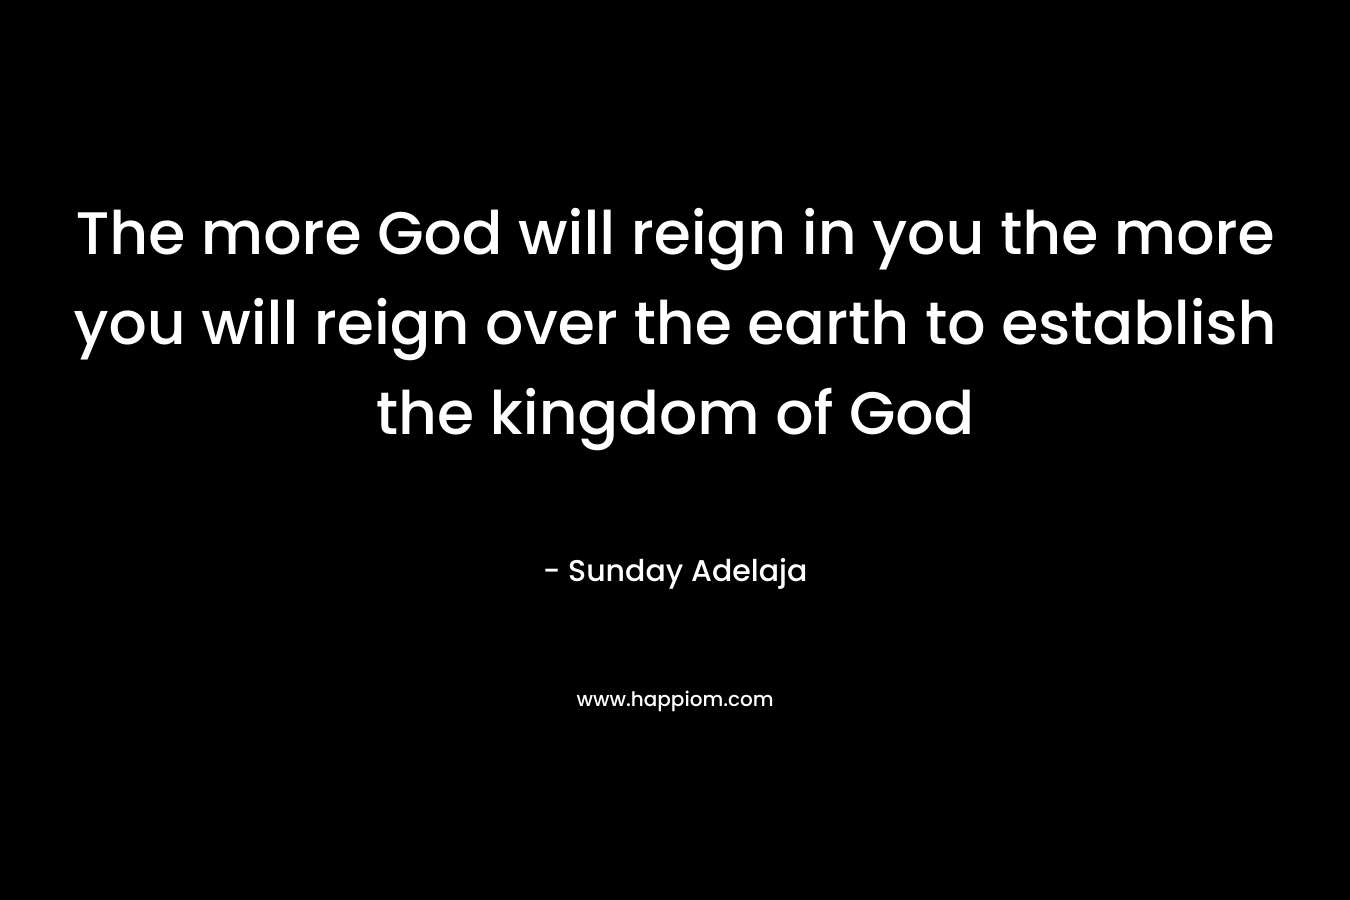 The more God will reign in you the more you will reign over the earth to establish the kingdom of God